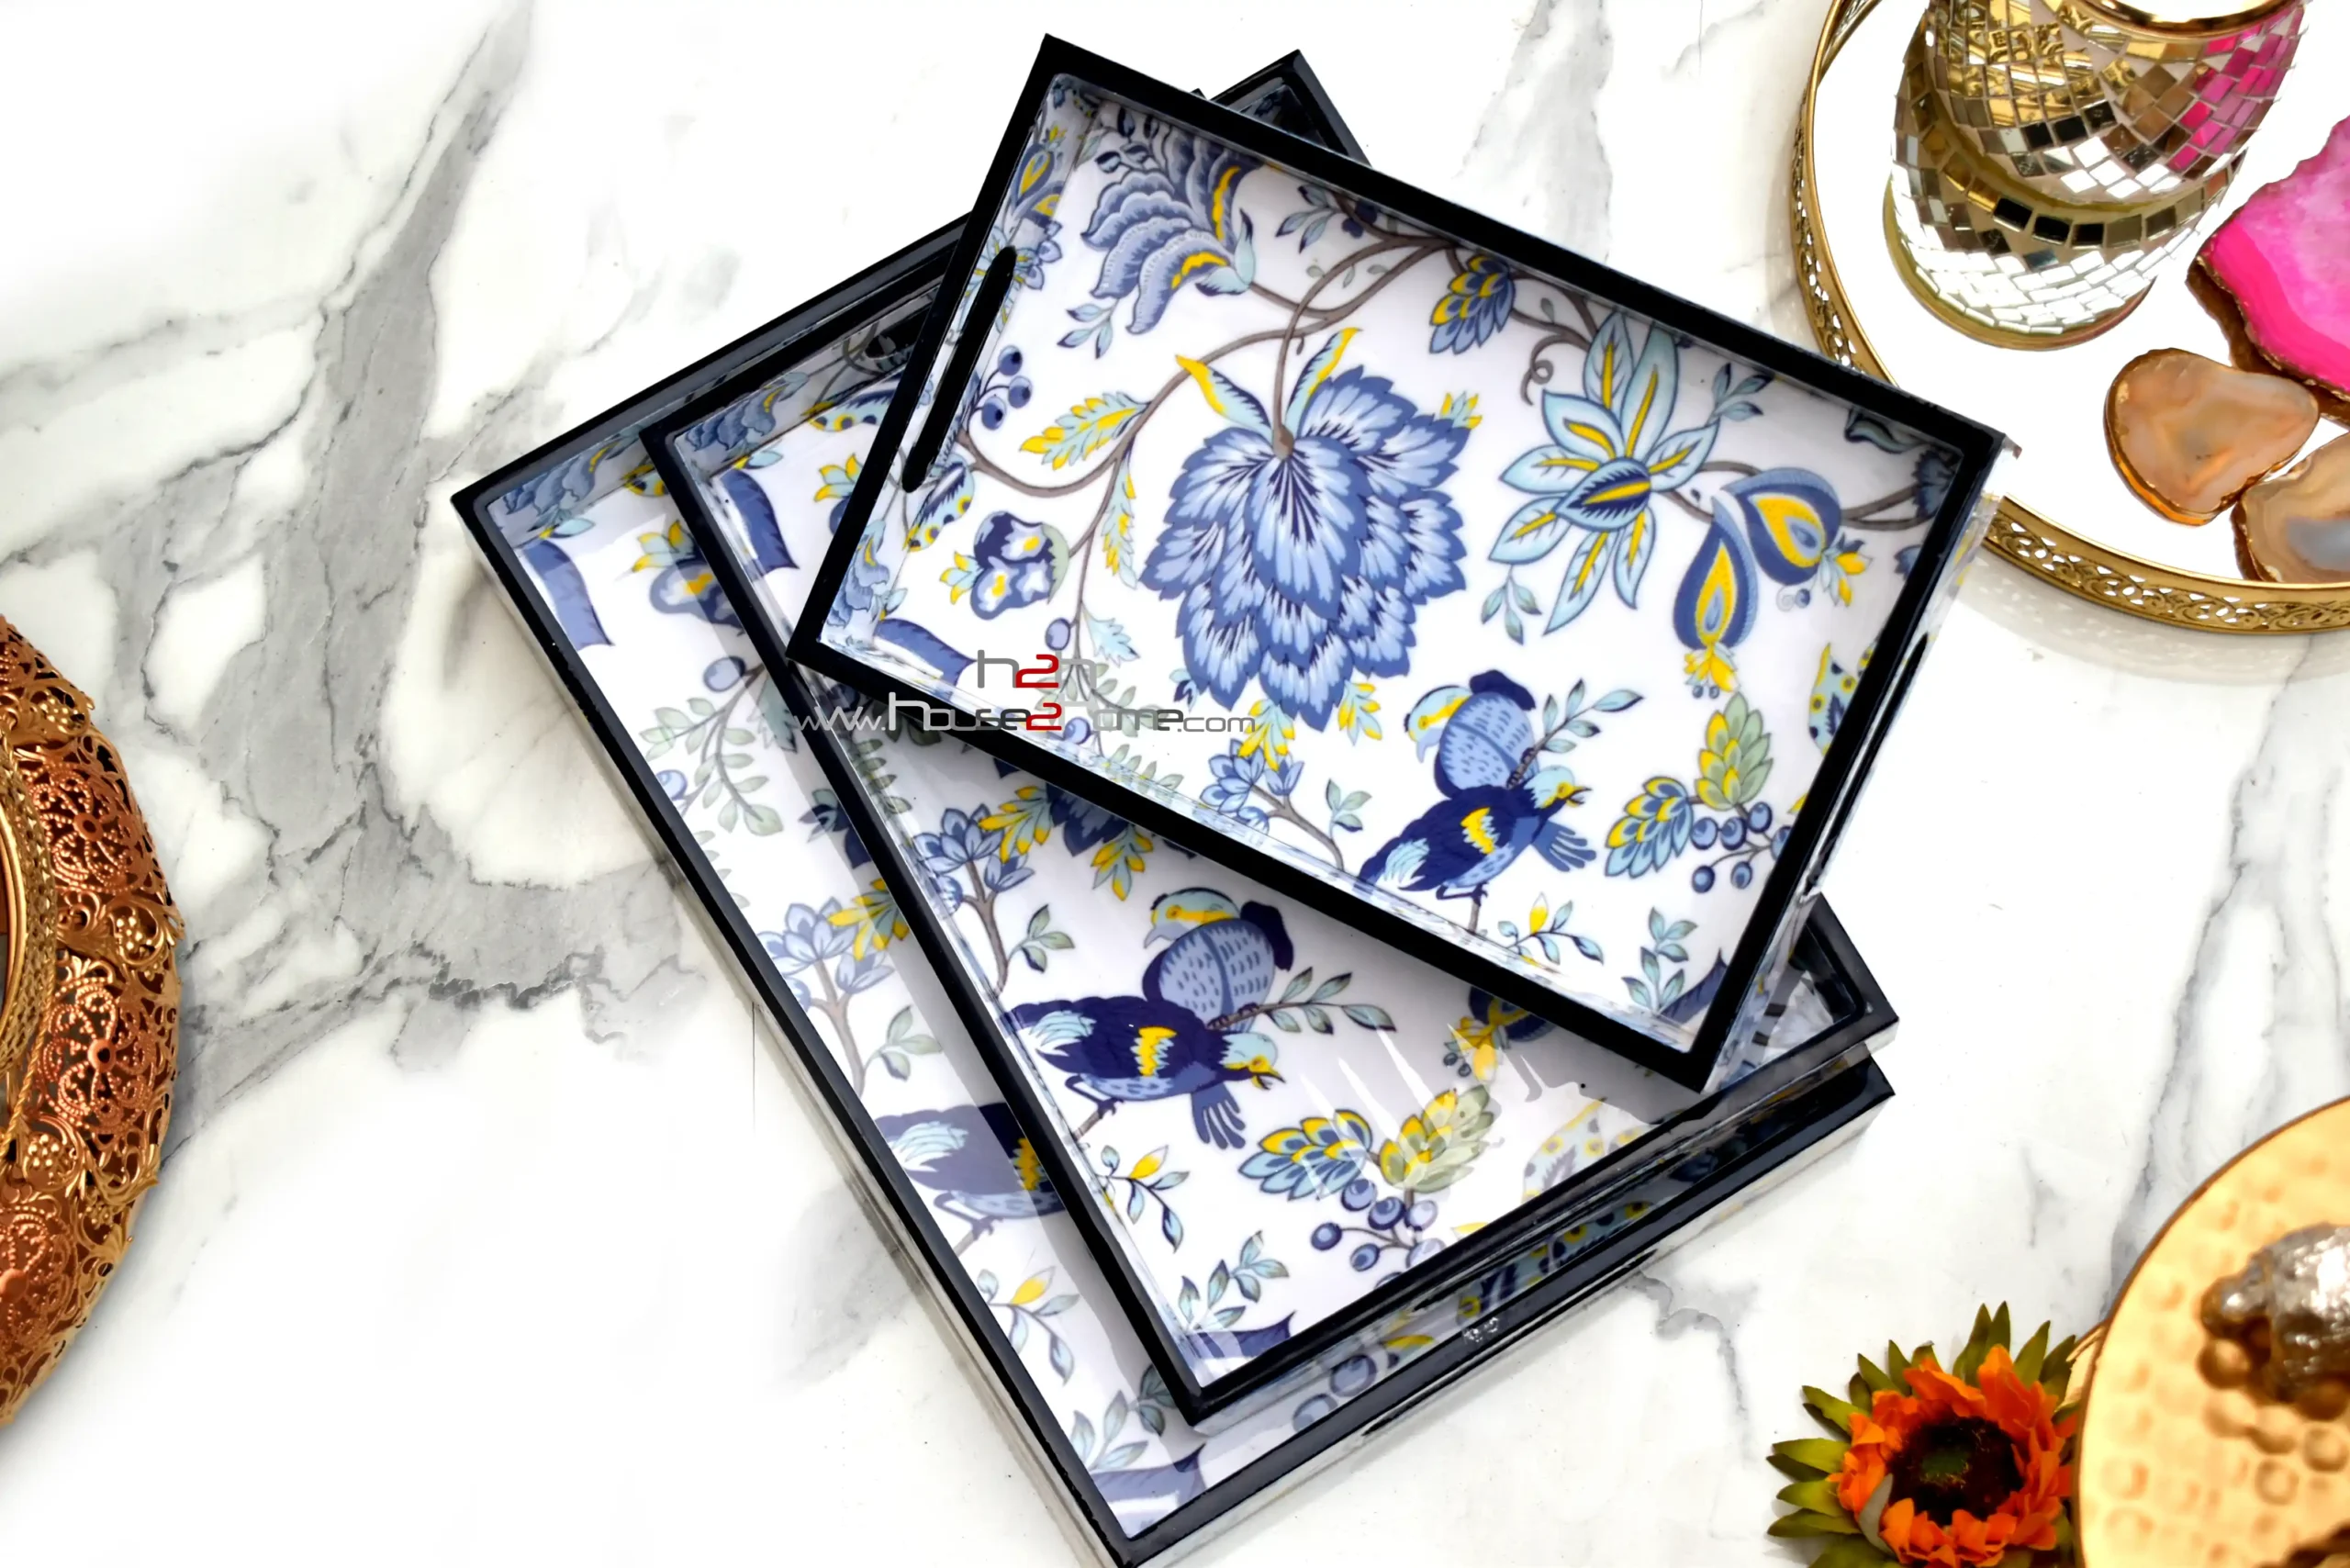 Trays - Exclusive collection of gifts by Wedtree